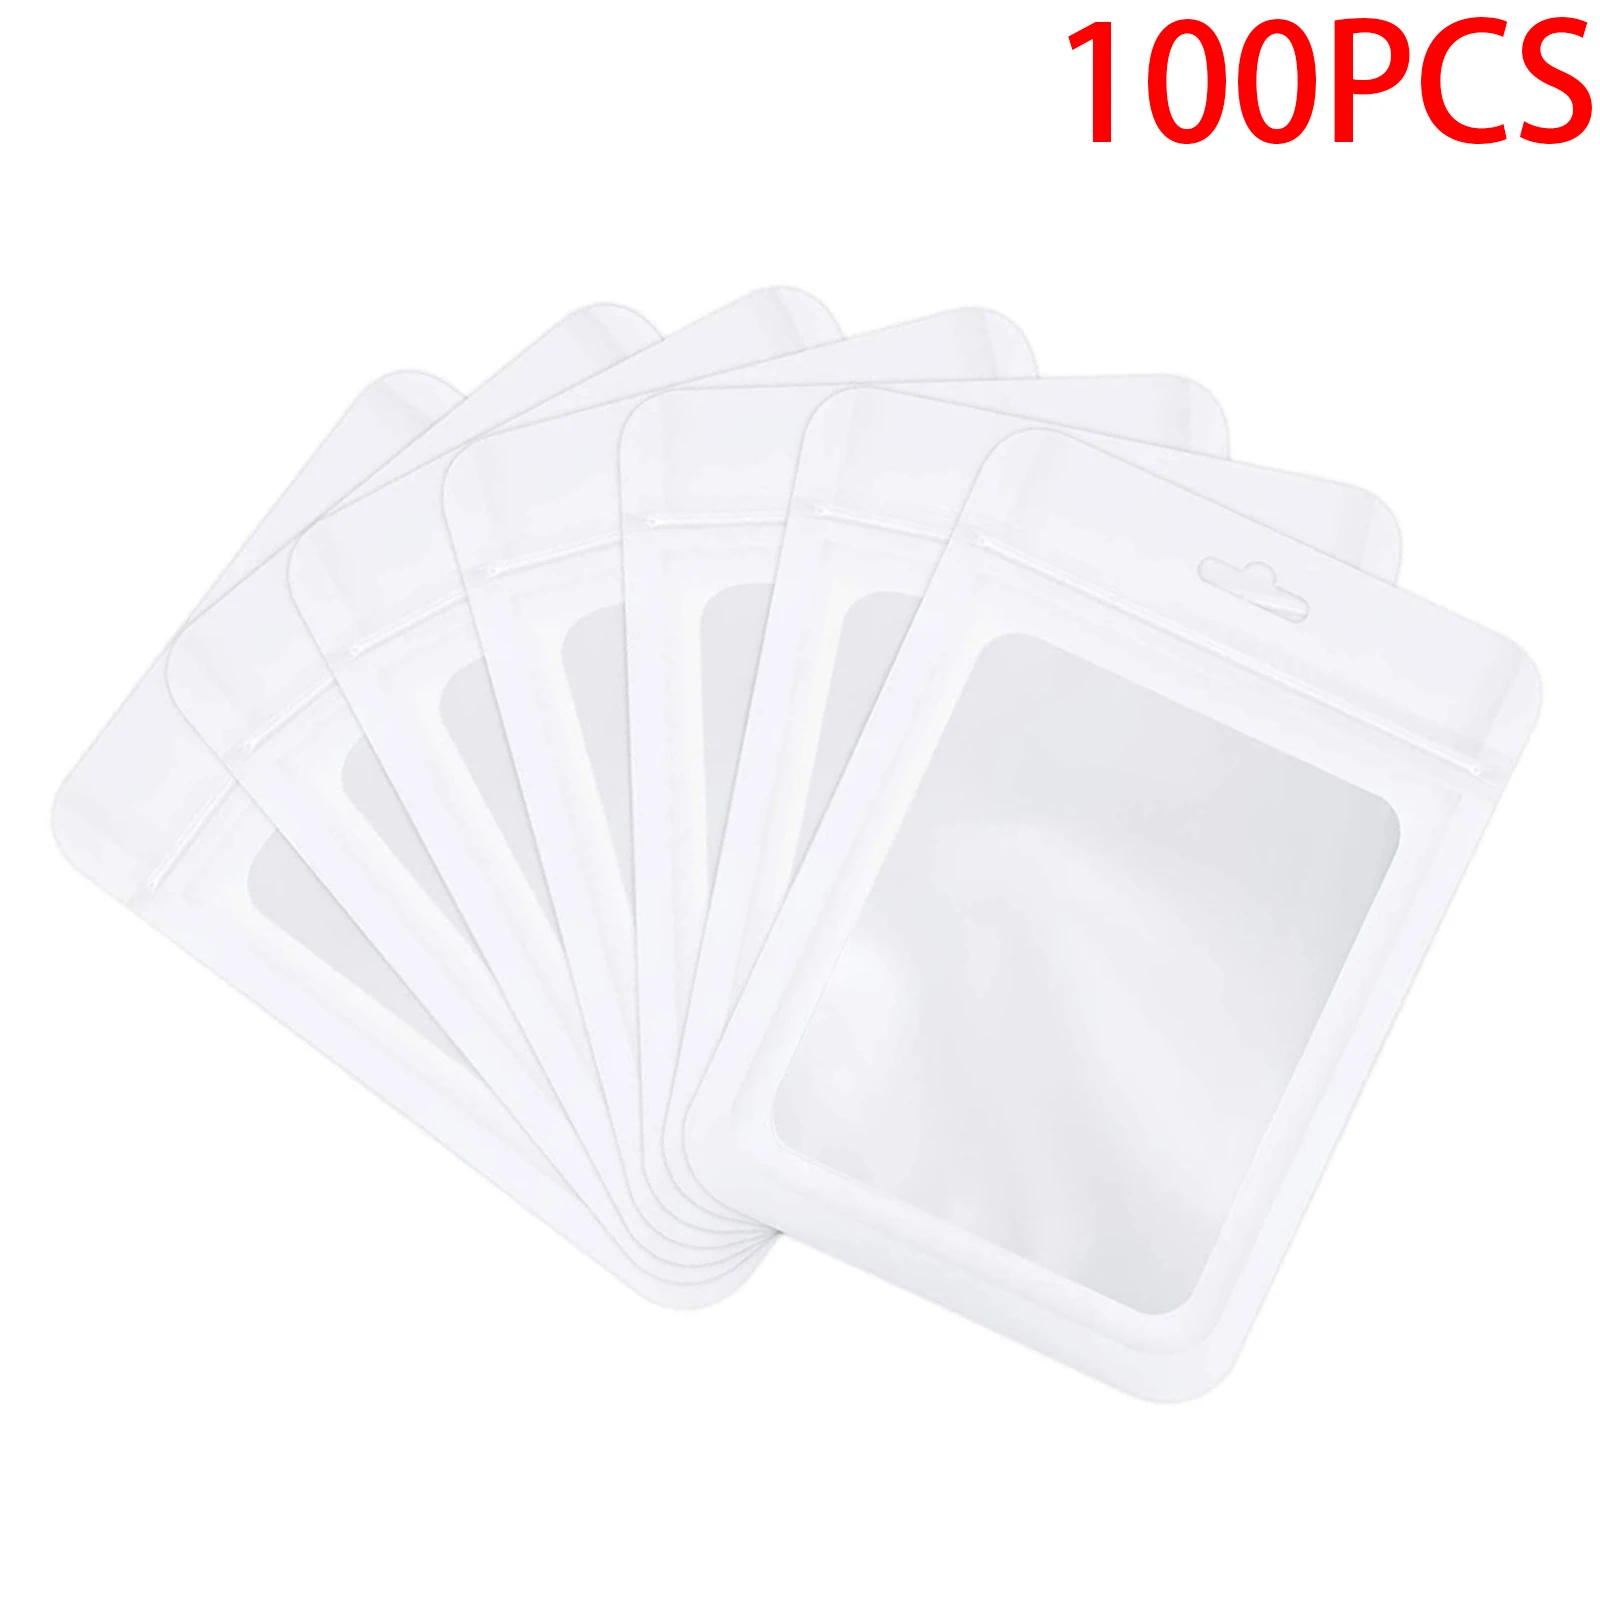 

100 Pcs Resealable Mylar Bags With Ziplock And Clear Window Packaging Bags Ziplock Bags For Food Self Sealing Storage Supplies